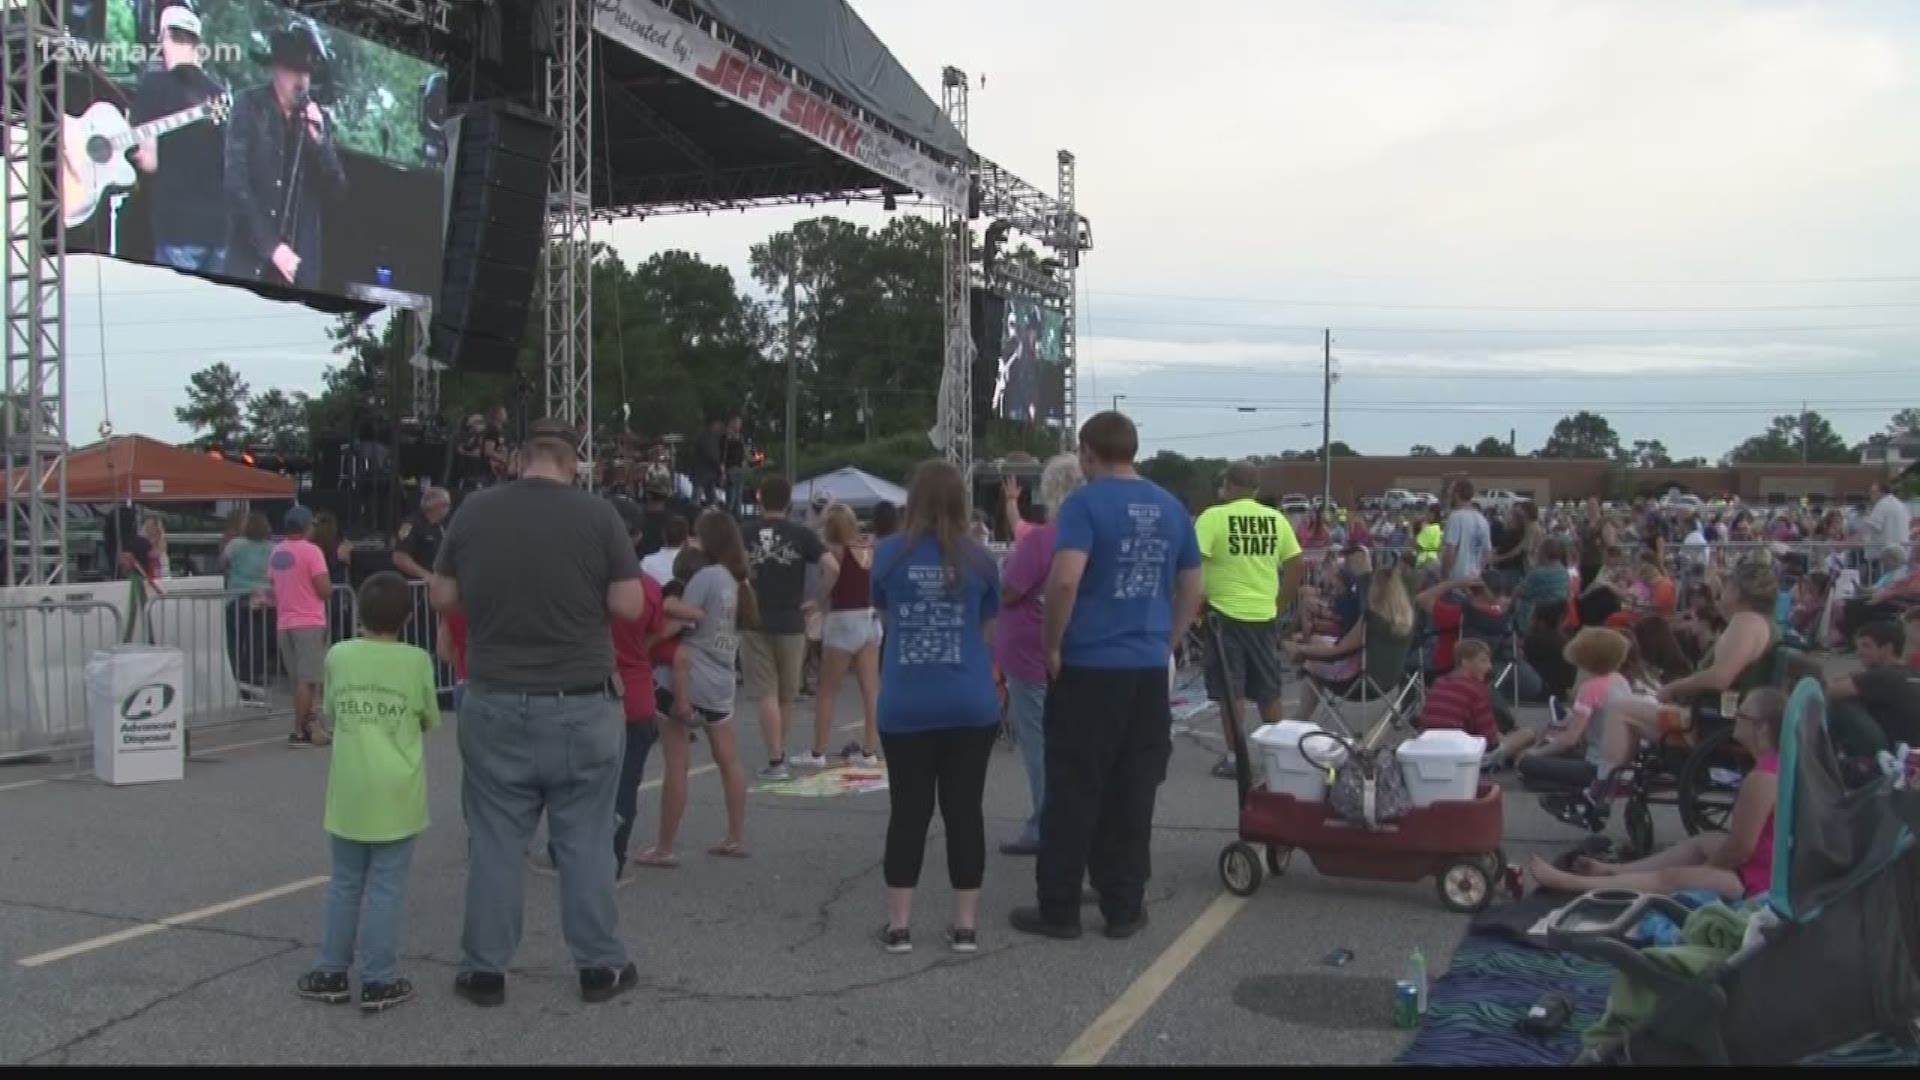 The Independence Day Celebration in Warner Robins is just a little over two weeks away, but it can't happen without the help of volunteers. Courteney Jacobazzi has more on how you can help keep the July 3 show rolling along.